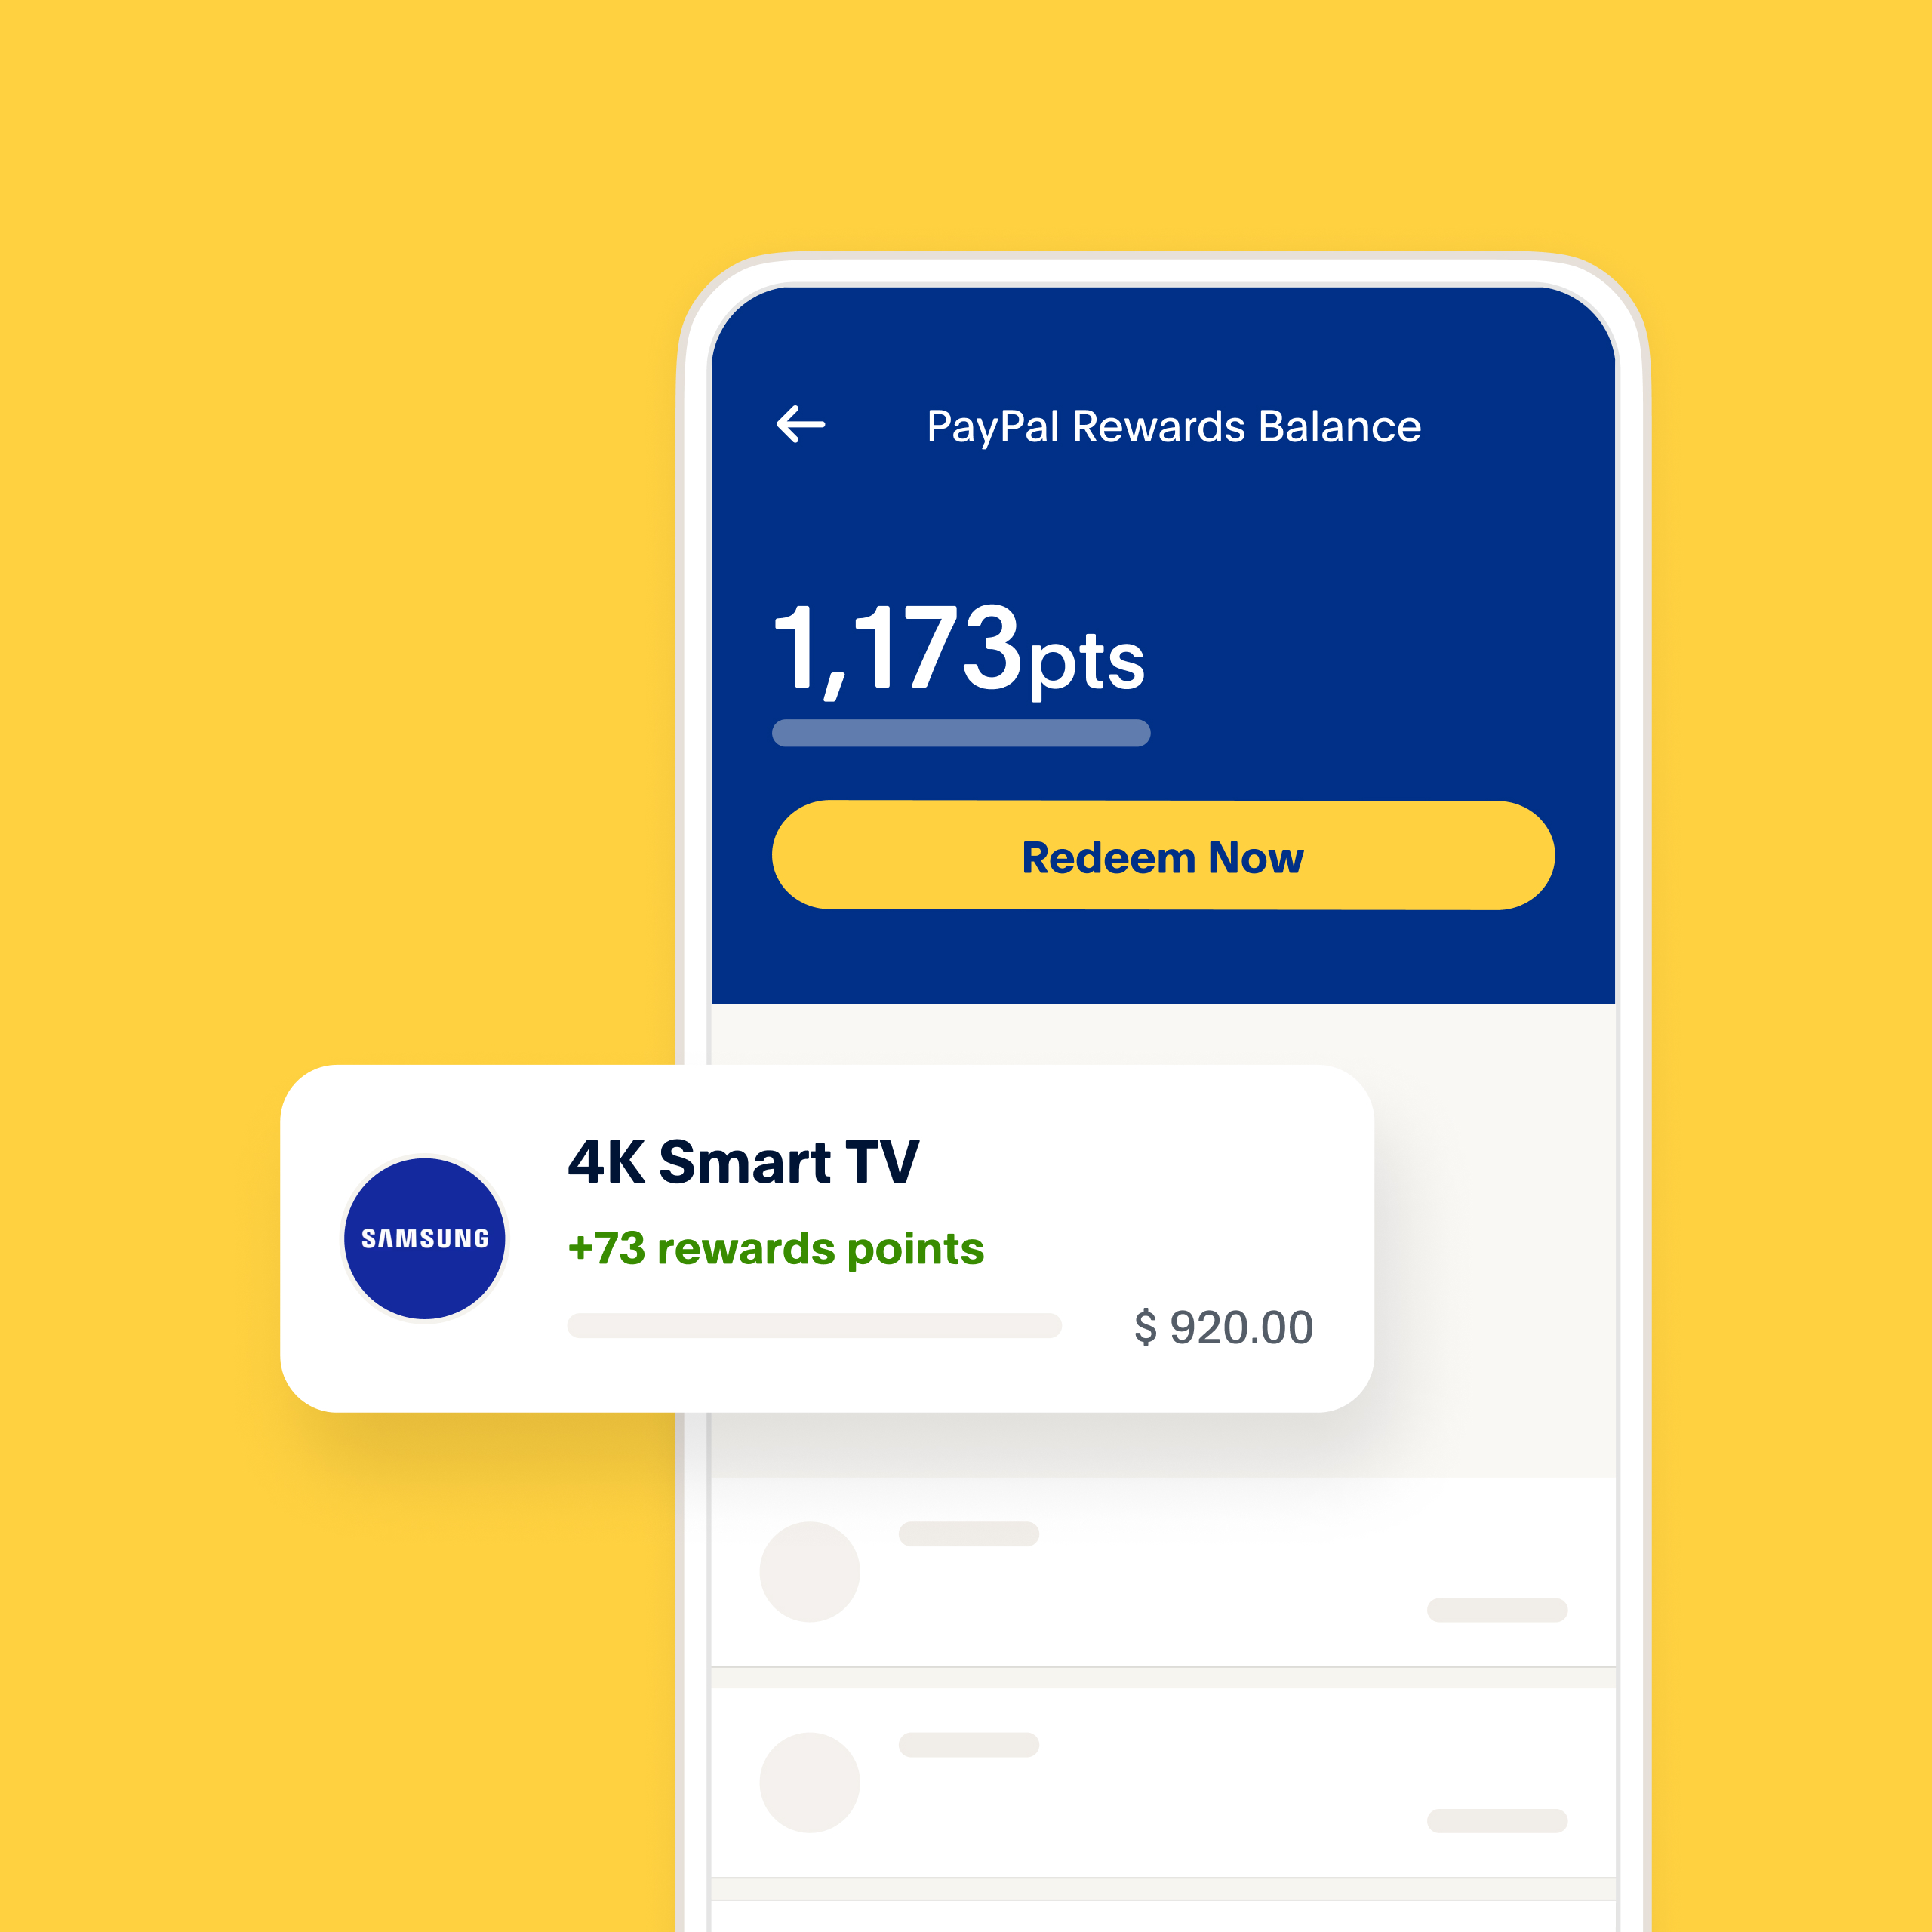 https://www.paypalobjects.com/marketing/web23/US/en/rebrand/Home/Redesigned-Home/Consumer/mkt=US-page=homepage-consumer-component=rewards-size=base.jpg